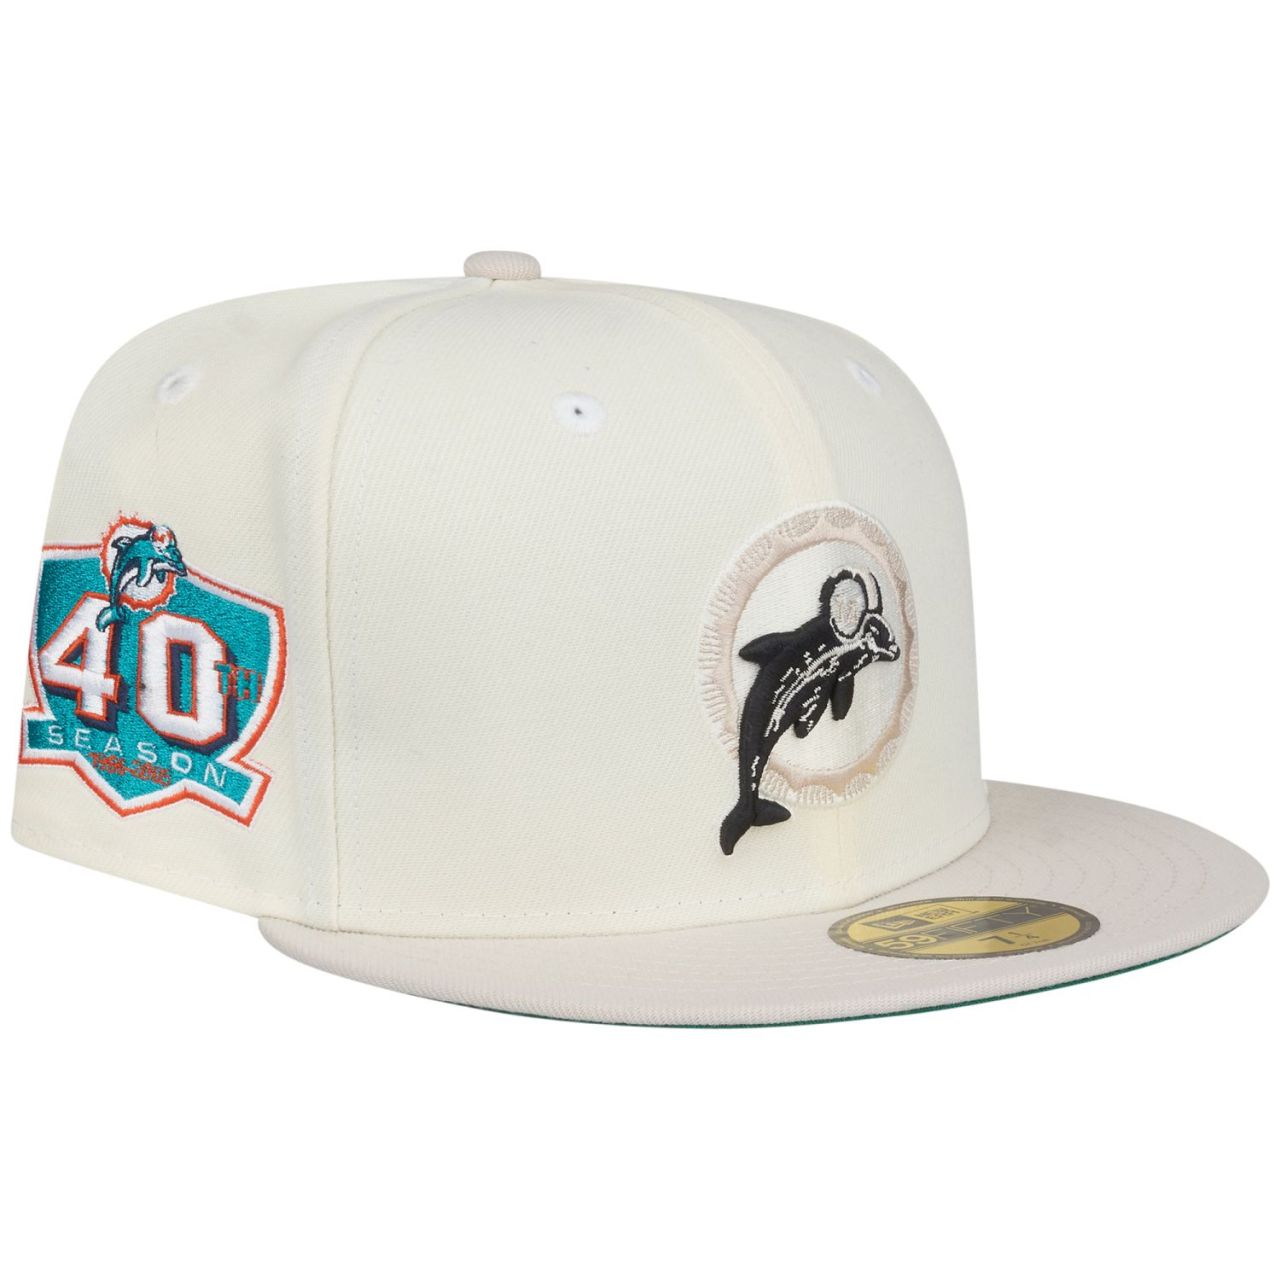 New Era 59Fifty Fitted Cap - SIDEPATCH Miami Dolphins von New Era